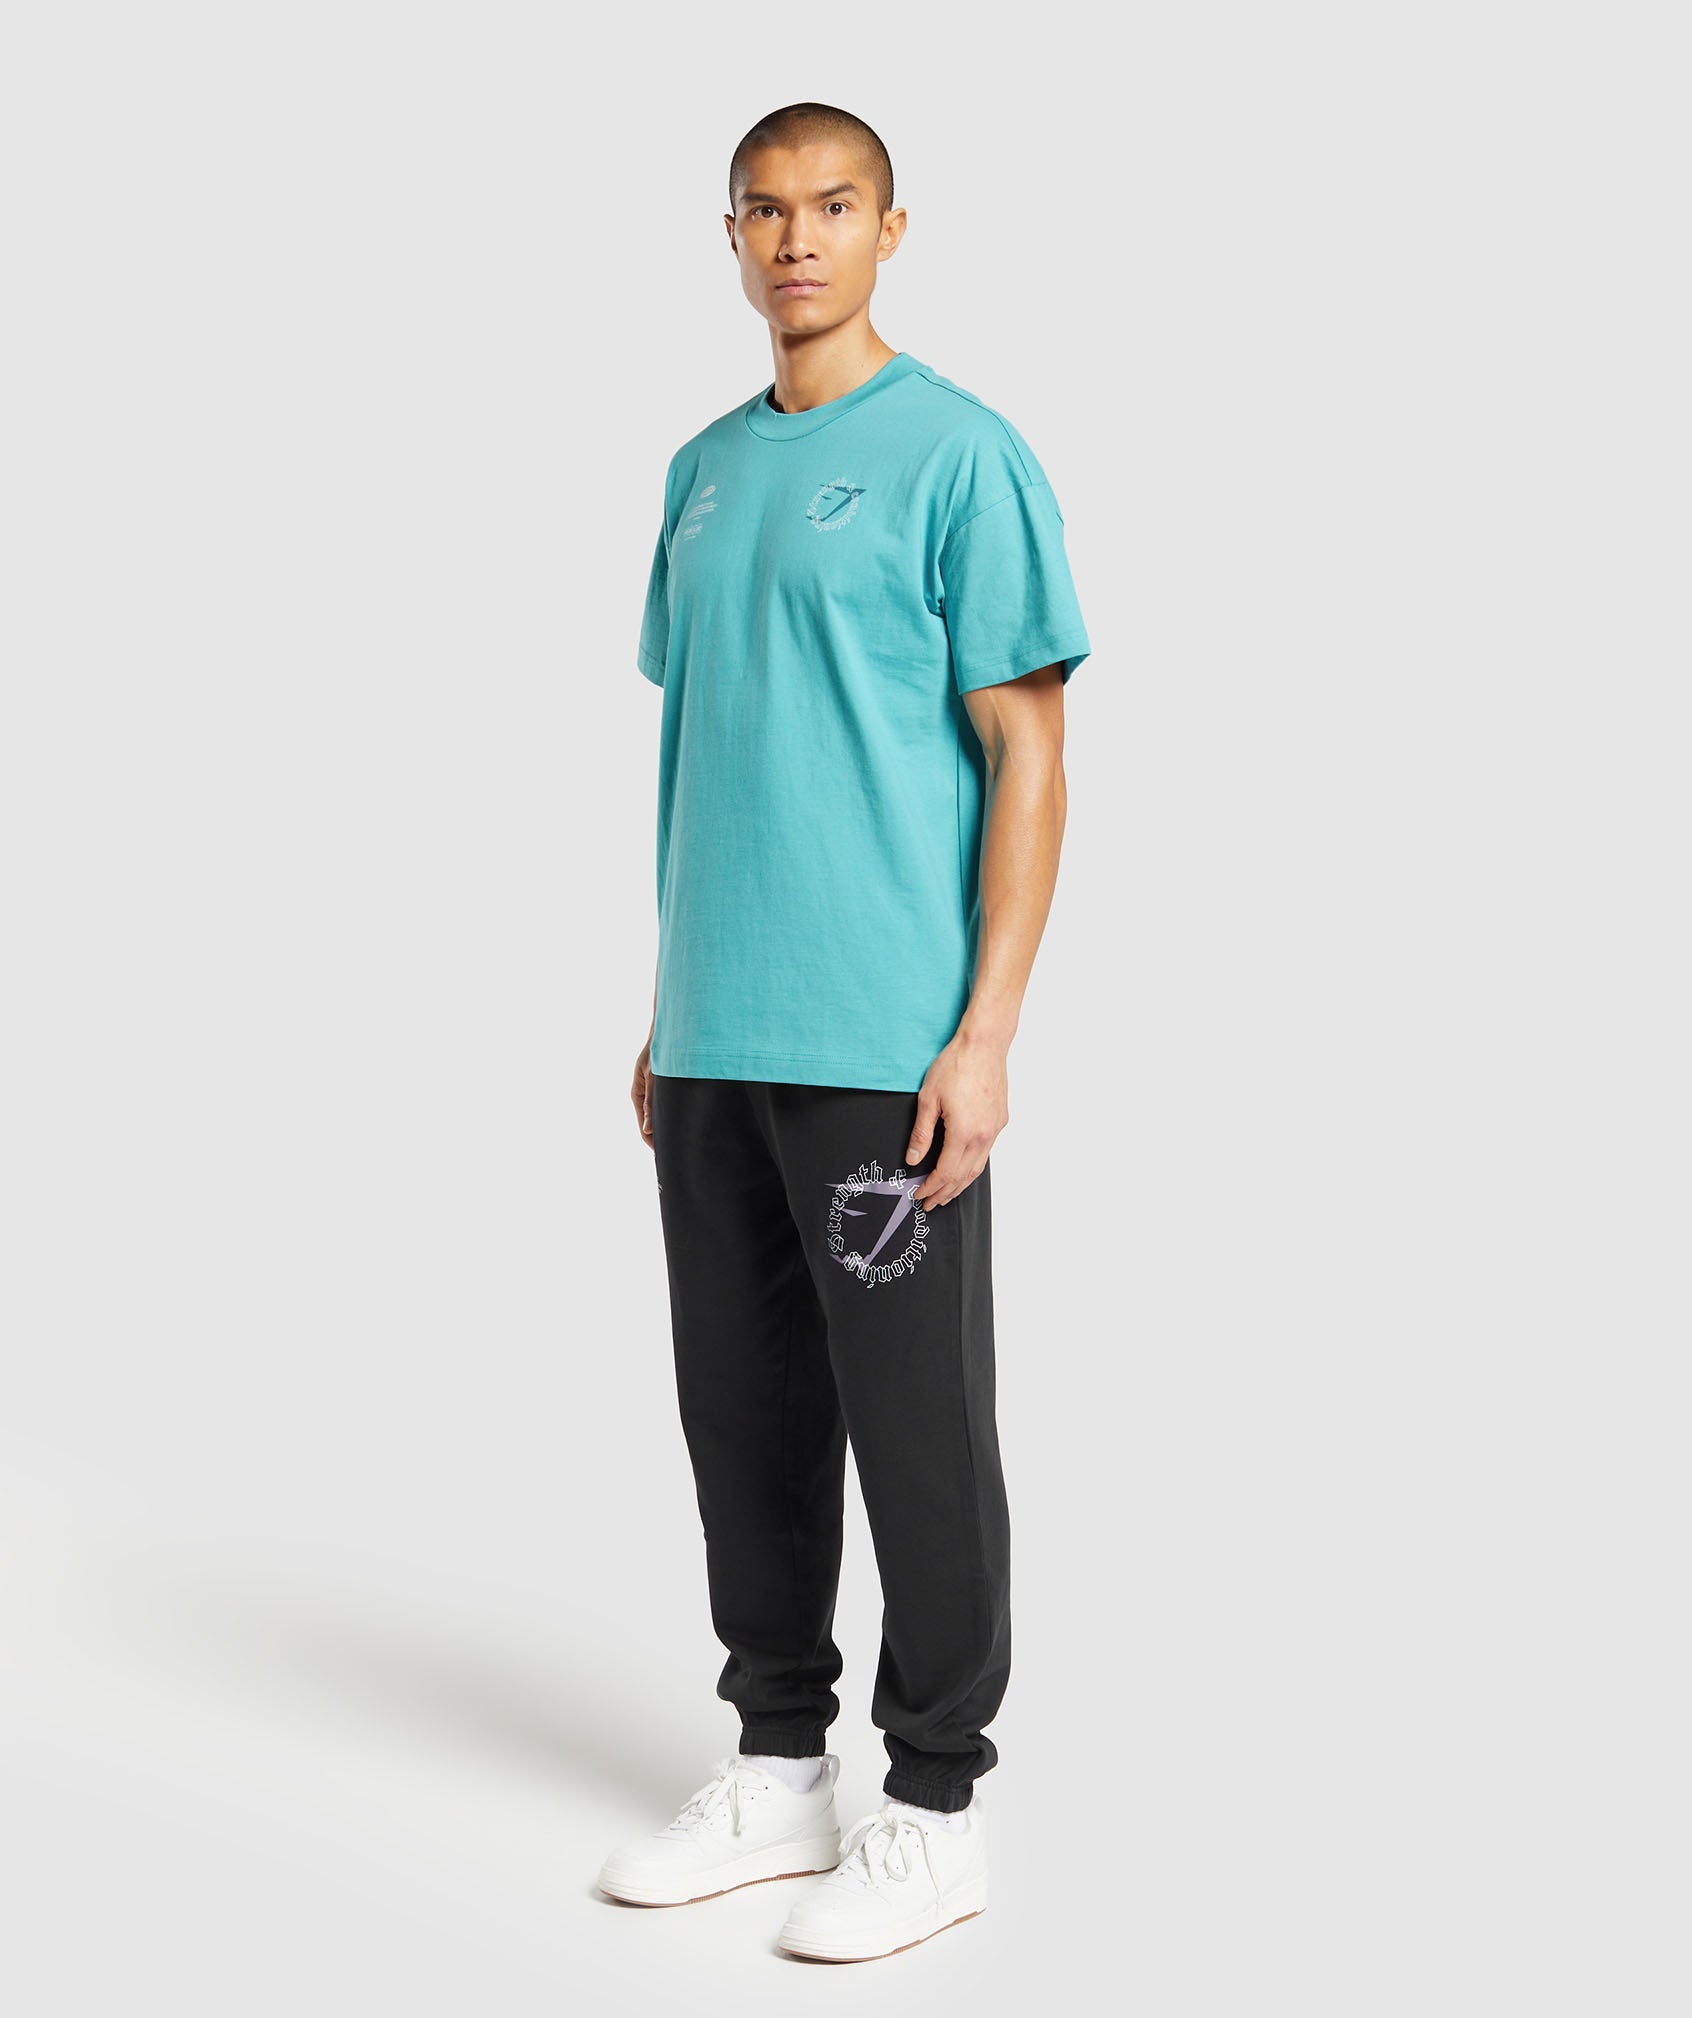 Strength and Conditioning T-Shirt in Artificial Teal - view 4